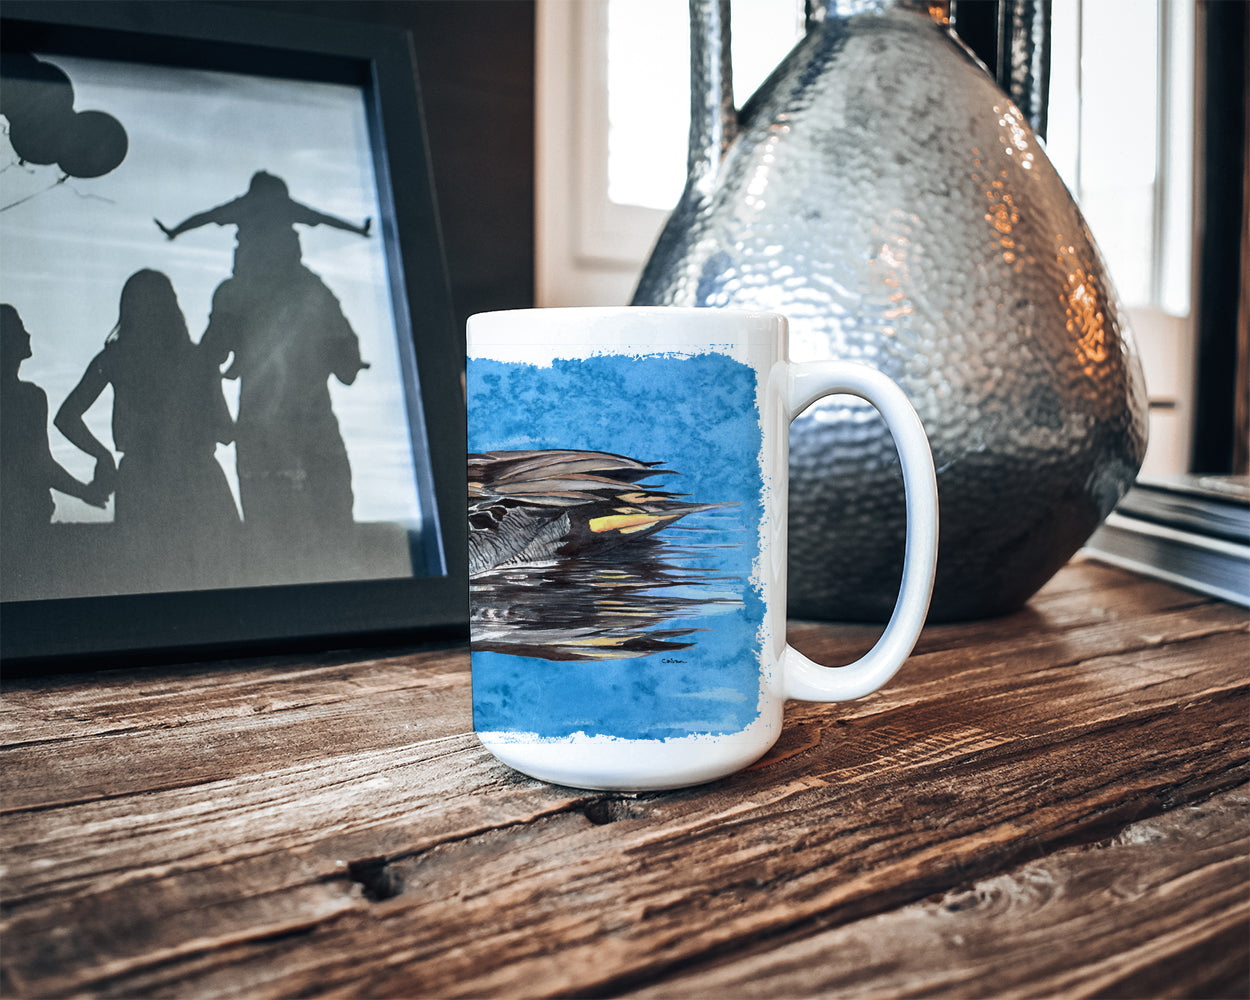 Teal Duck Dishwasher Safe Microwavable Ceramic Coffee Mug 15 ounce 8830CM15  the-store.com.